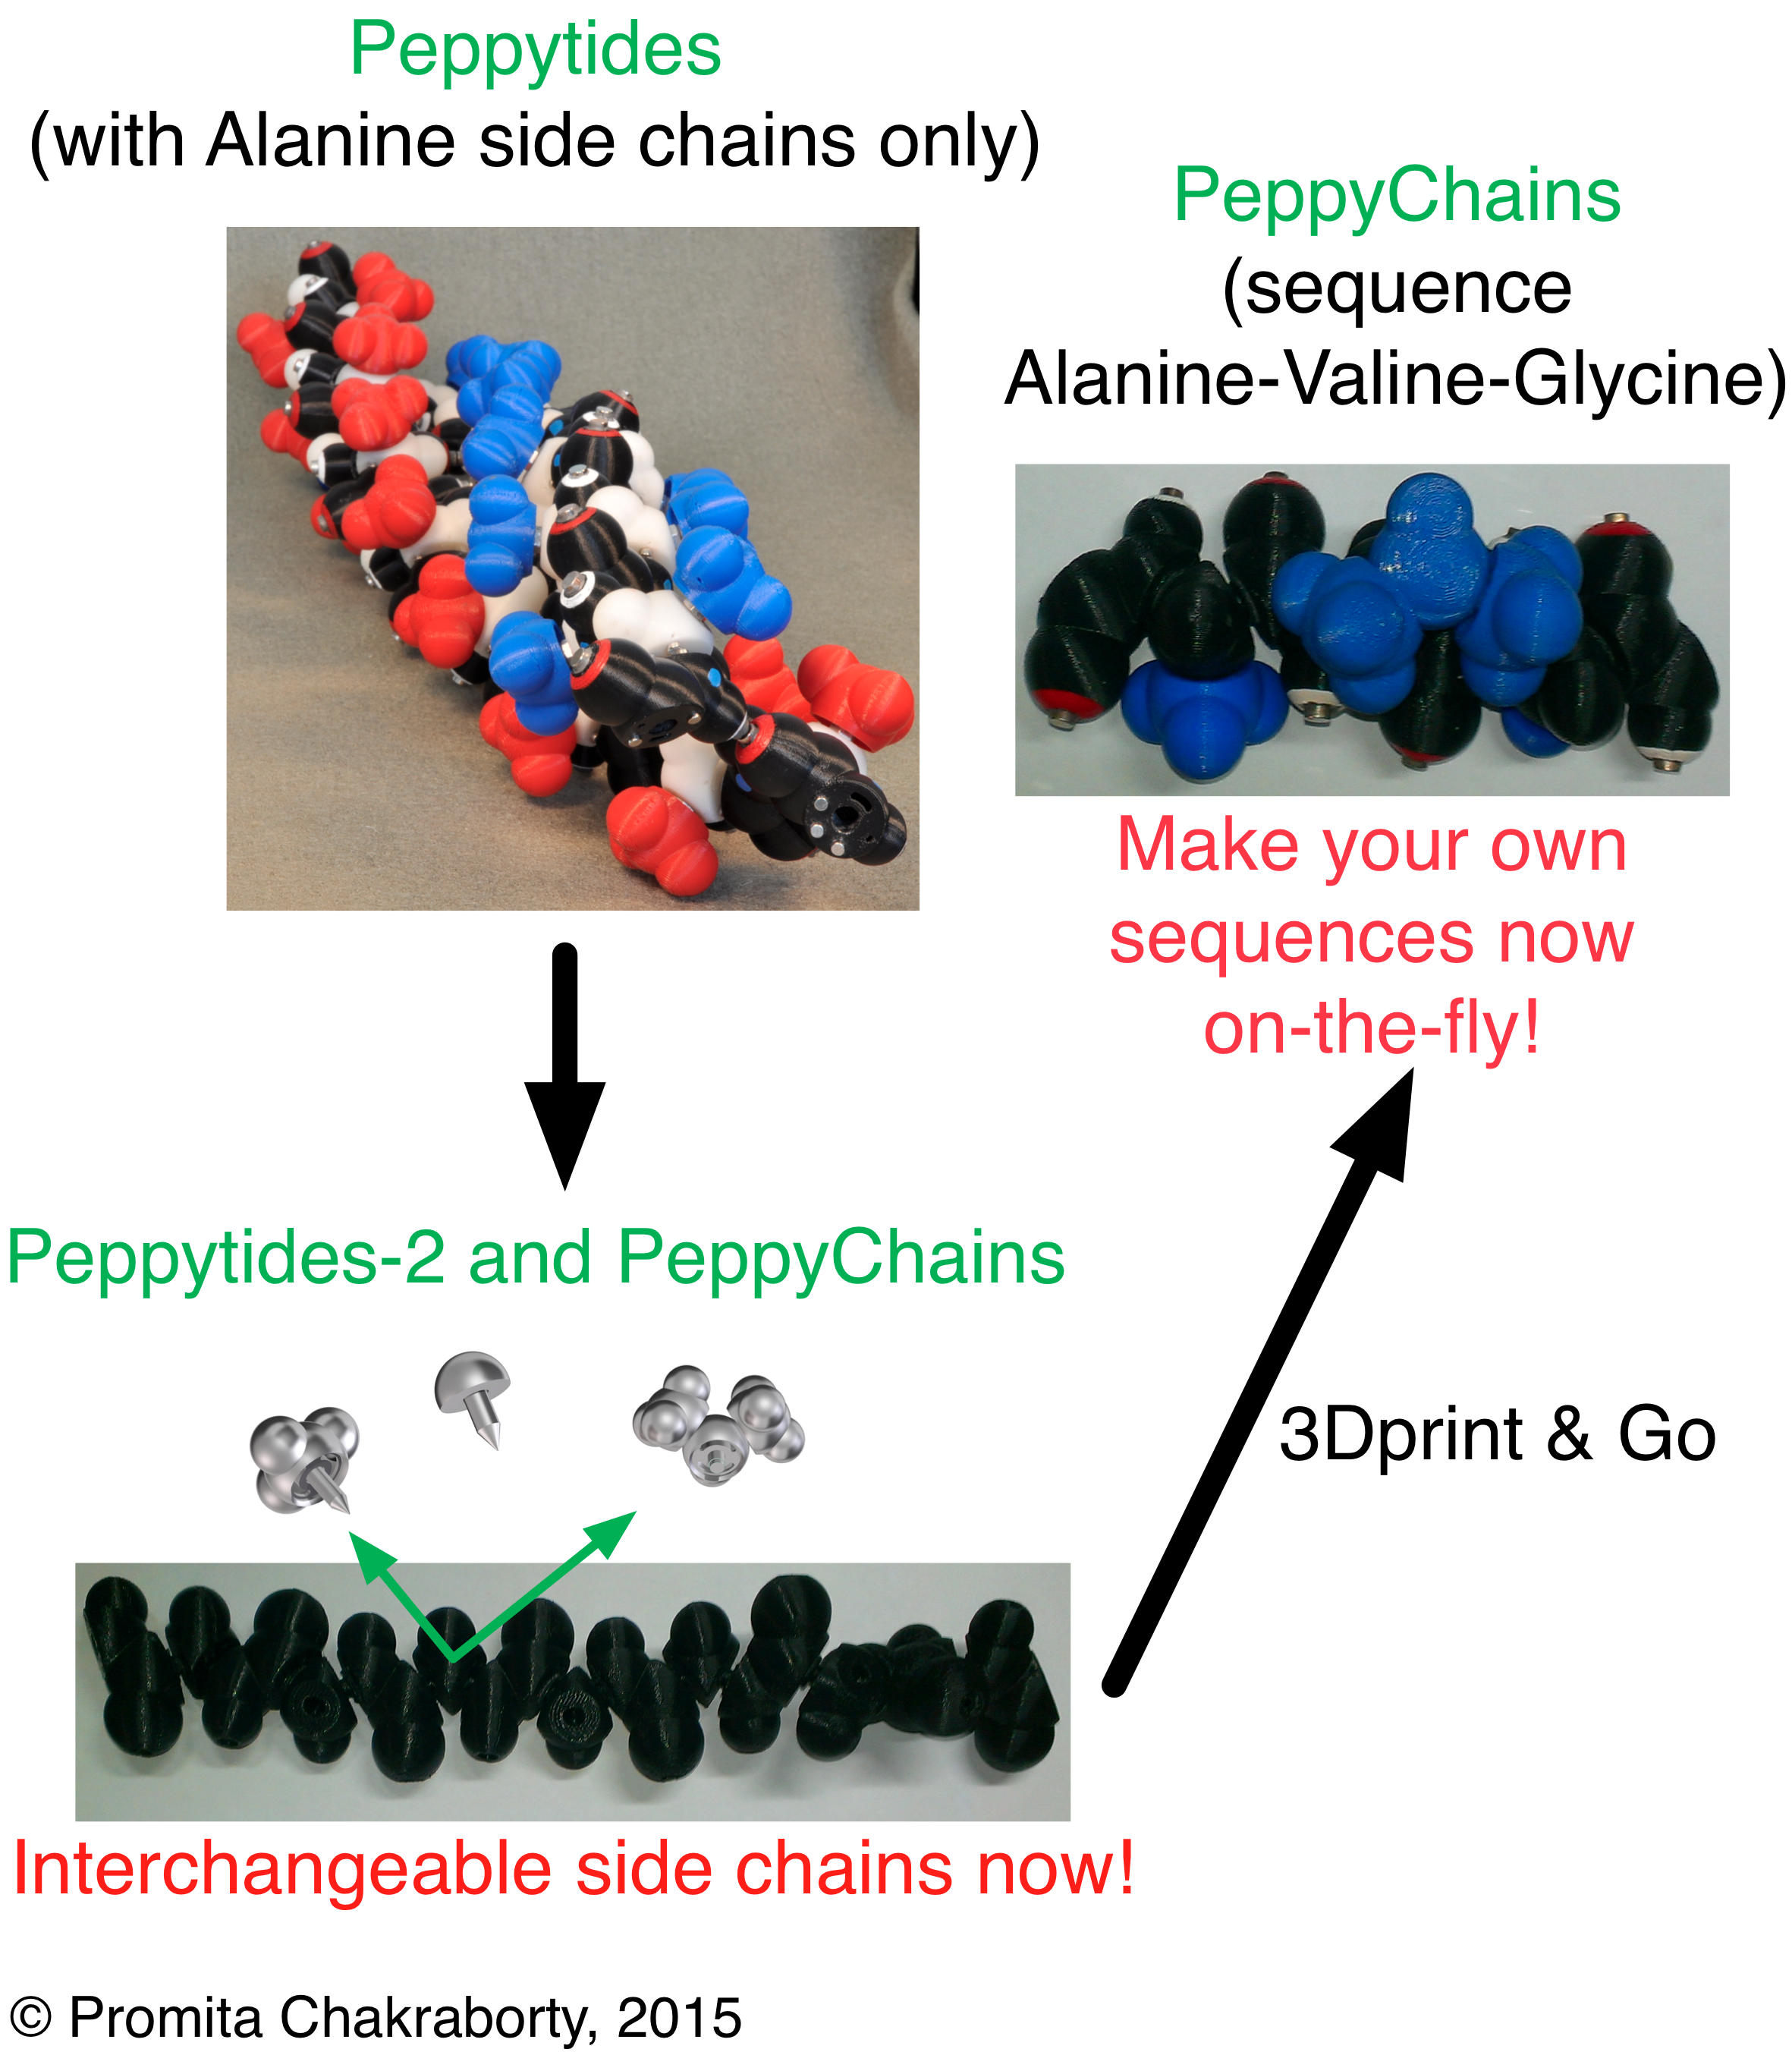 Peppytides-2 and PeppyChains: 3D-printed foldable protein models